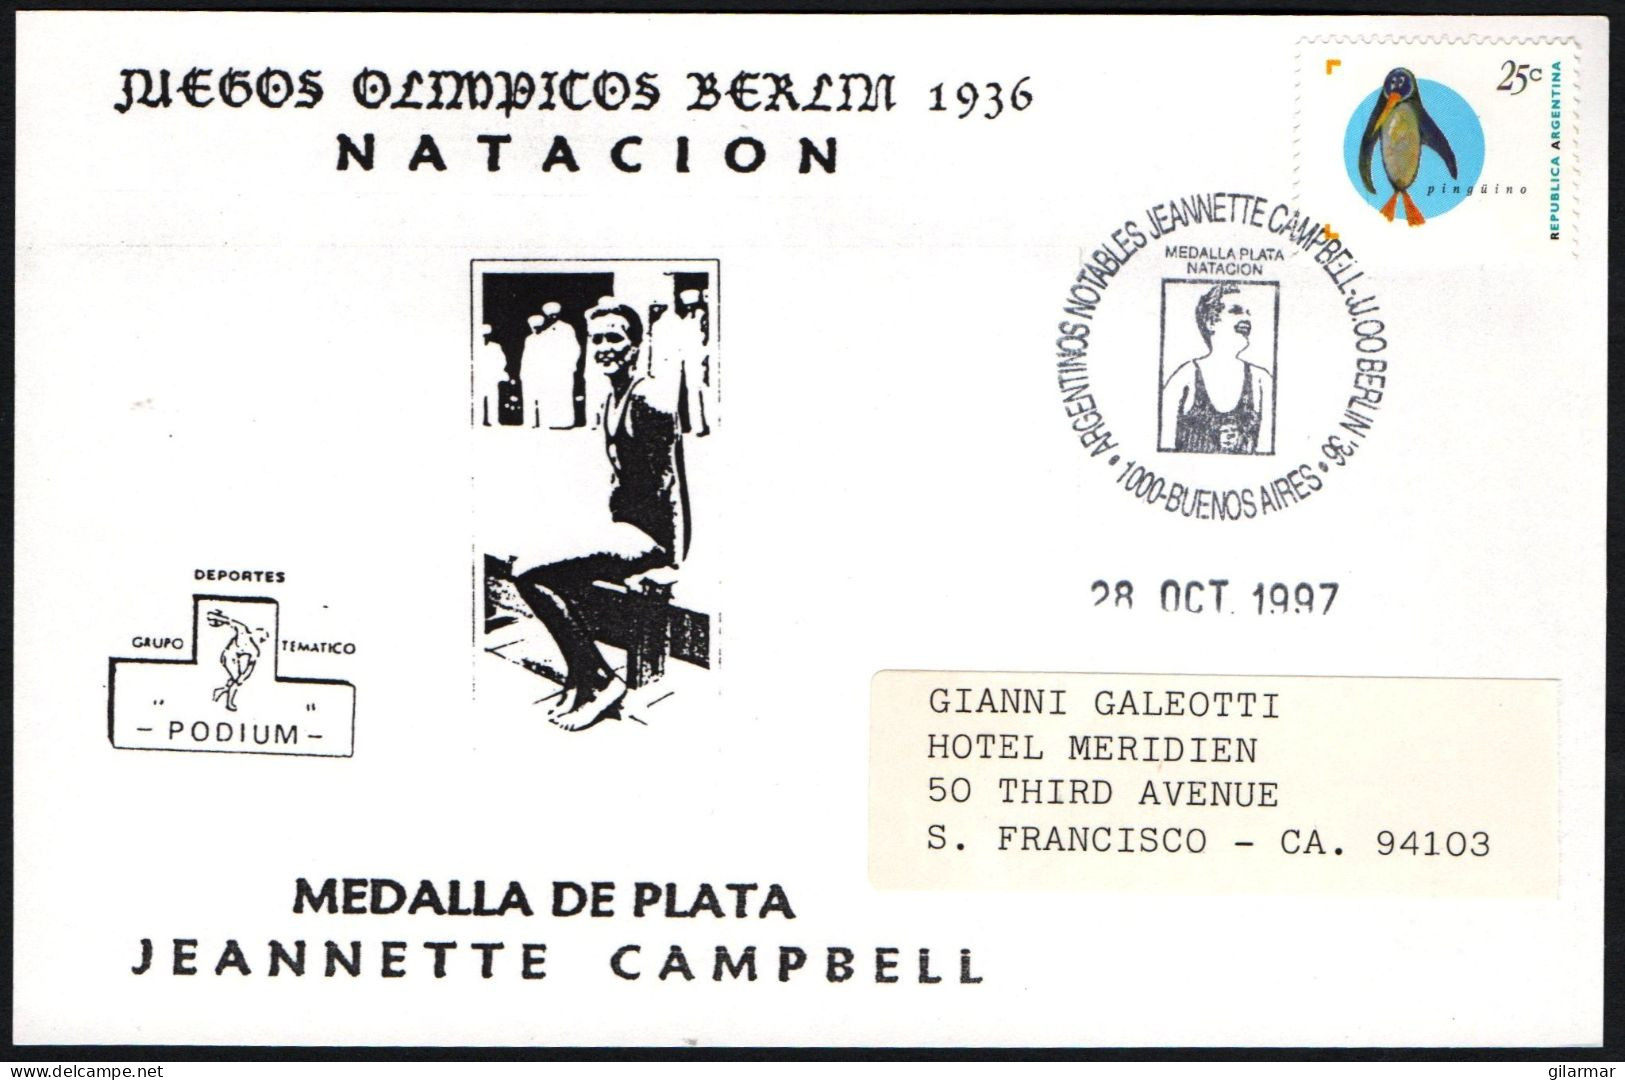 ARGENTINA BUENOS AIRES 1997 - OLYMPIC GAMES BERLIN '36 - OLYMPIC WINNER JEANNETTE CAMPBELL - SWIMMING - G - Sommer 1936: Berlin